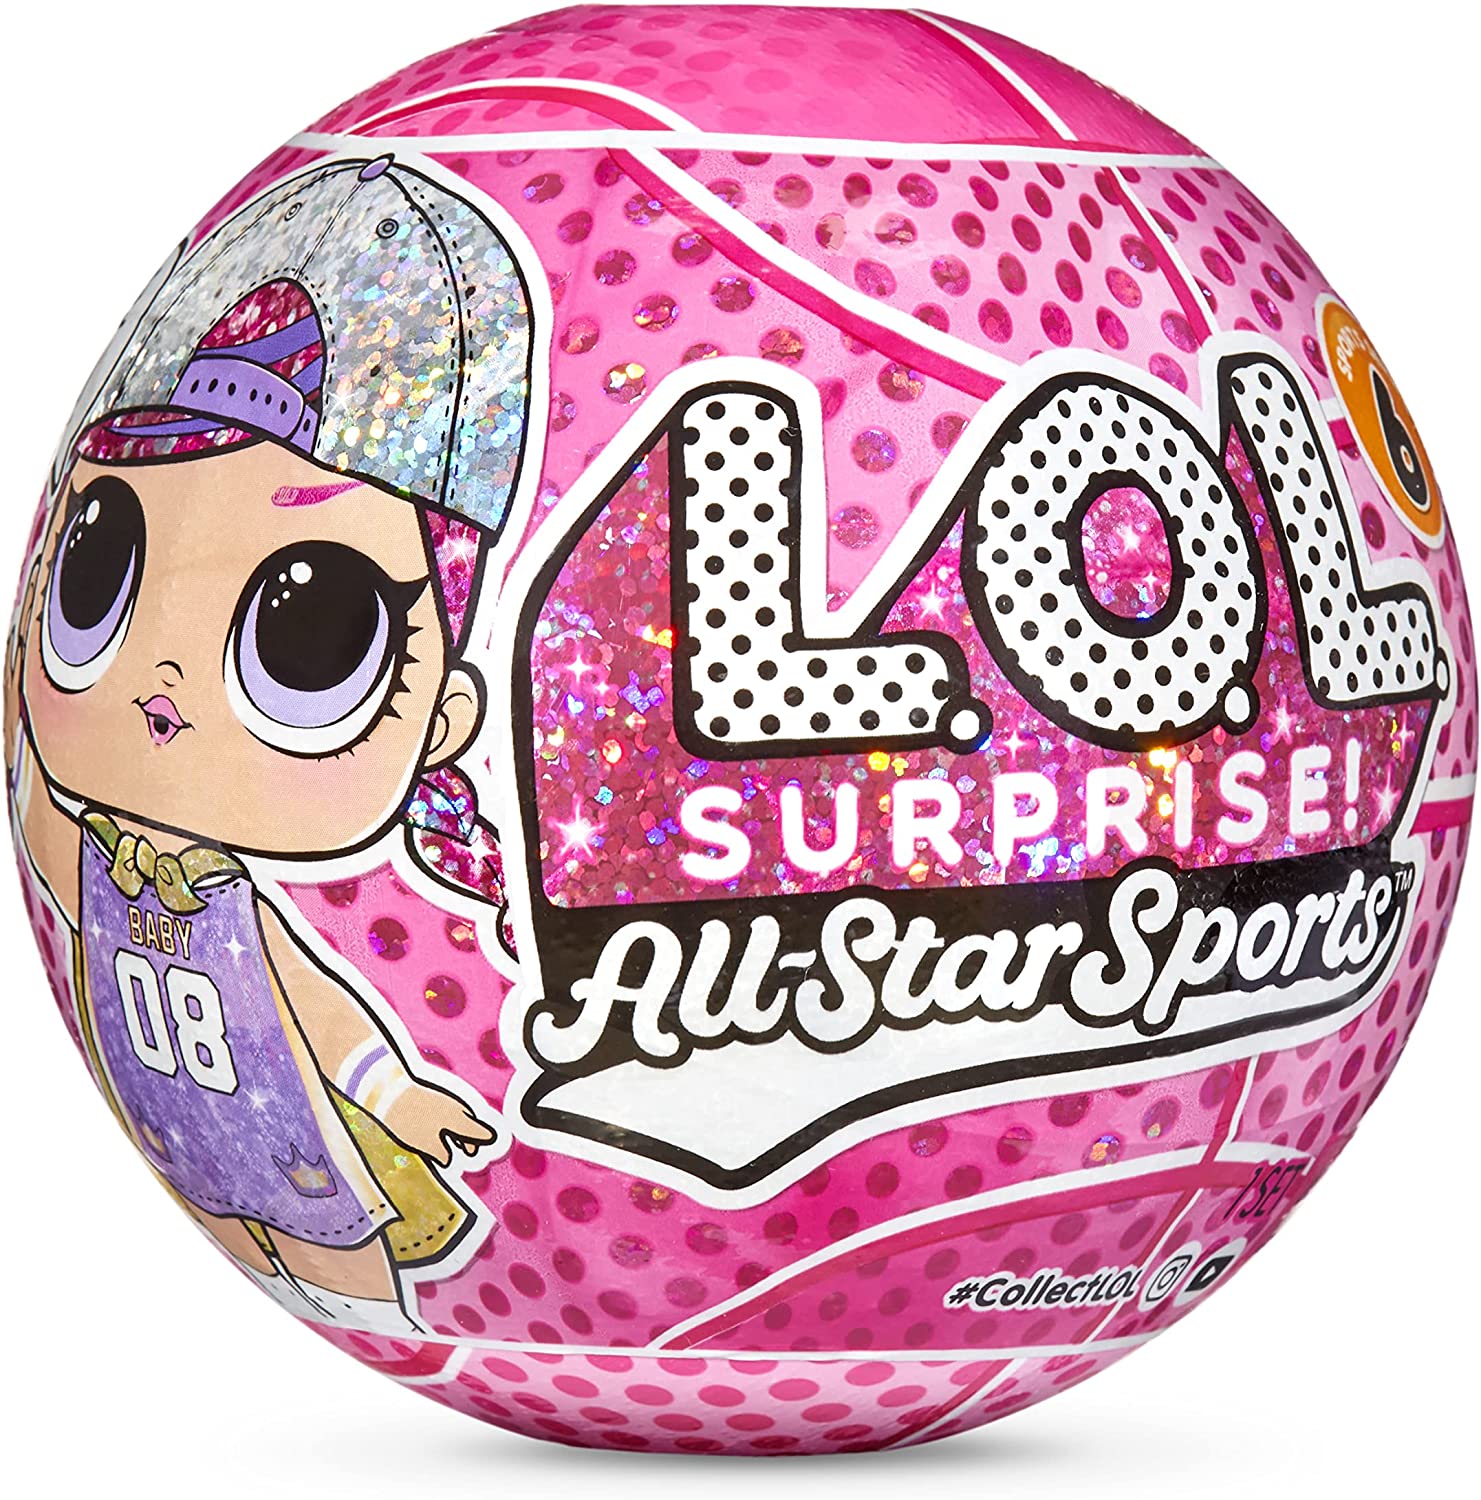 LOL. Surprise All-Star B.B.s Sports Sparkly Basketball Series Doll w/ 8 Surprises $4.90 & More + FS w/ Amazon Prime or FS on $25+